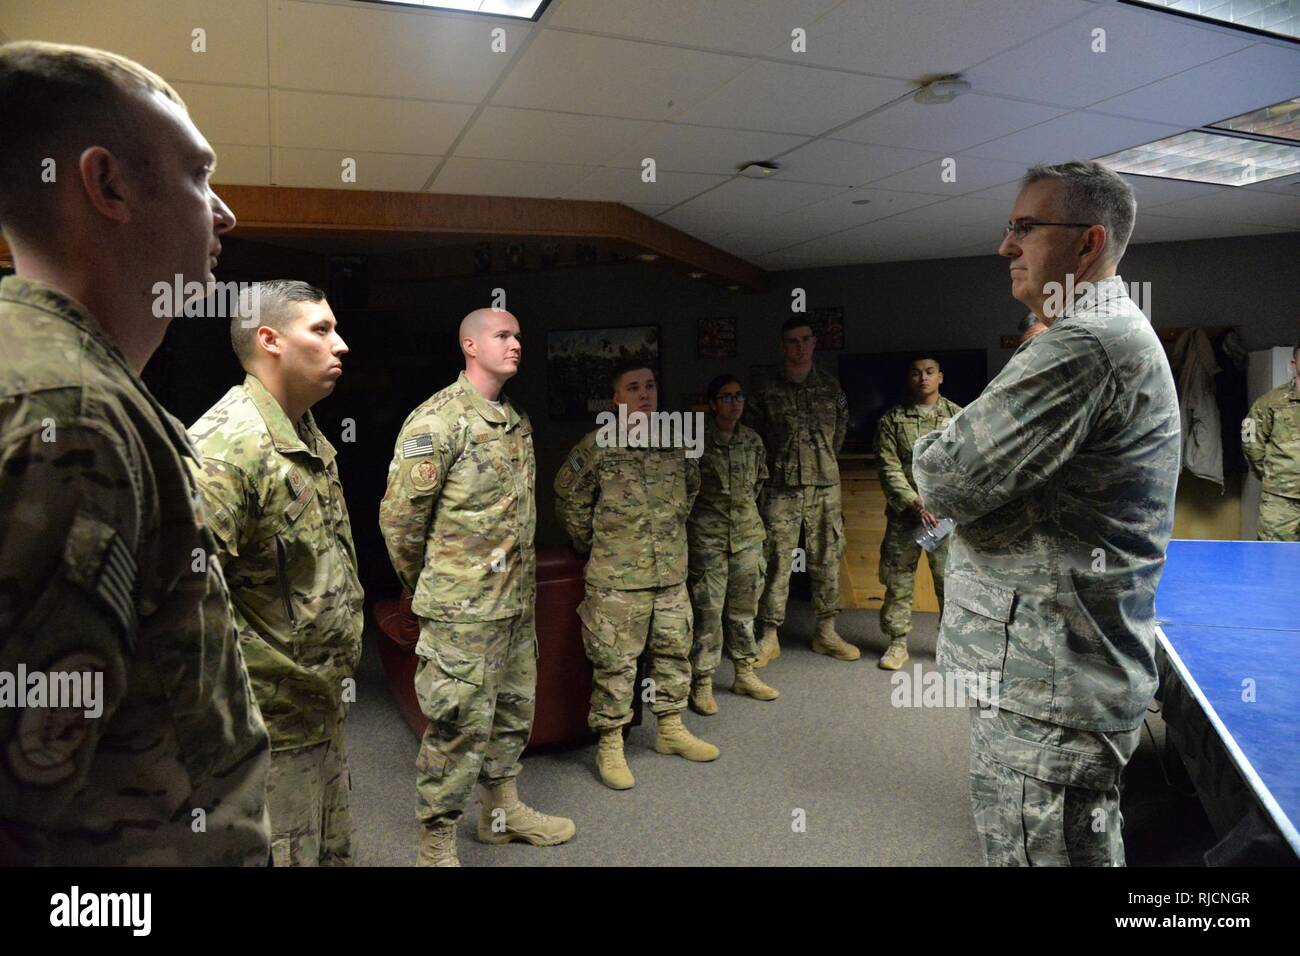 U.S. Air Force Gen. John Hyten, commander of U.S. Strategic Command (USSTRATCOM), speaks with airmen at a missile alert facility near Simms, Mont., Jan. 16, 2018. During his visit, Hyten also met with Malmstrom Air Force Base leaders and airmen to thank them for their support to USSTRATCOM’s deterrence mission. He also toured facilities at the base, including the weapons storage area and the maintenance bay. Stock Photo